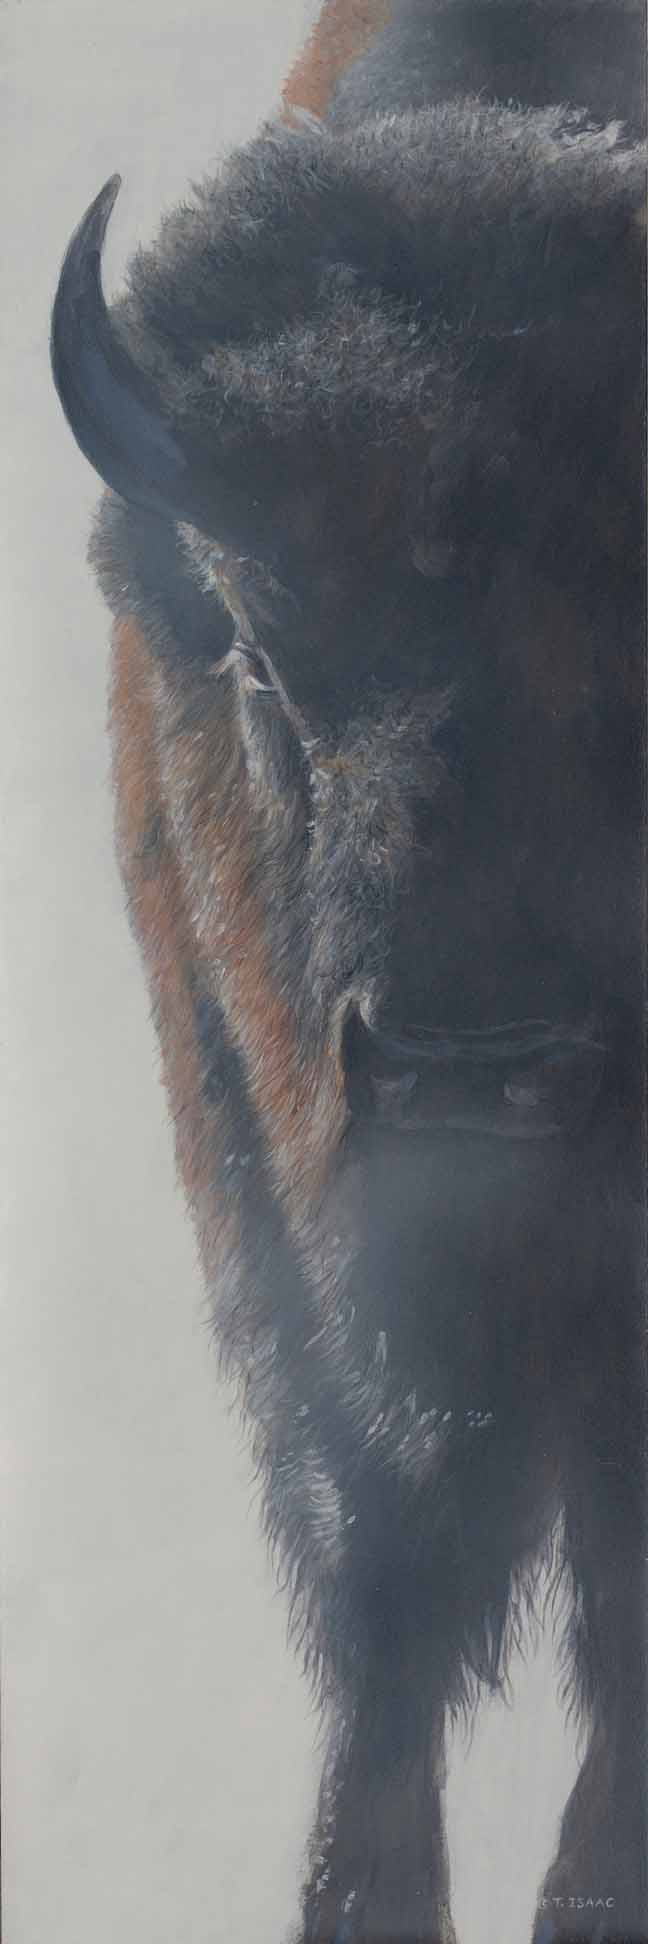 TI – Bison in the Mist © Terry Isaac